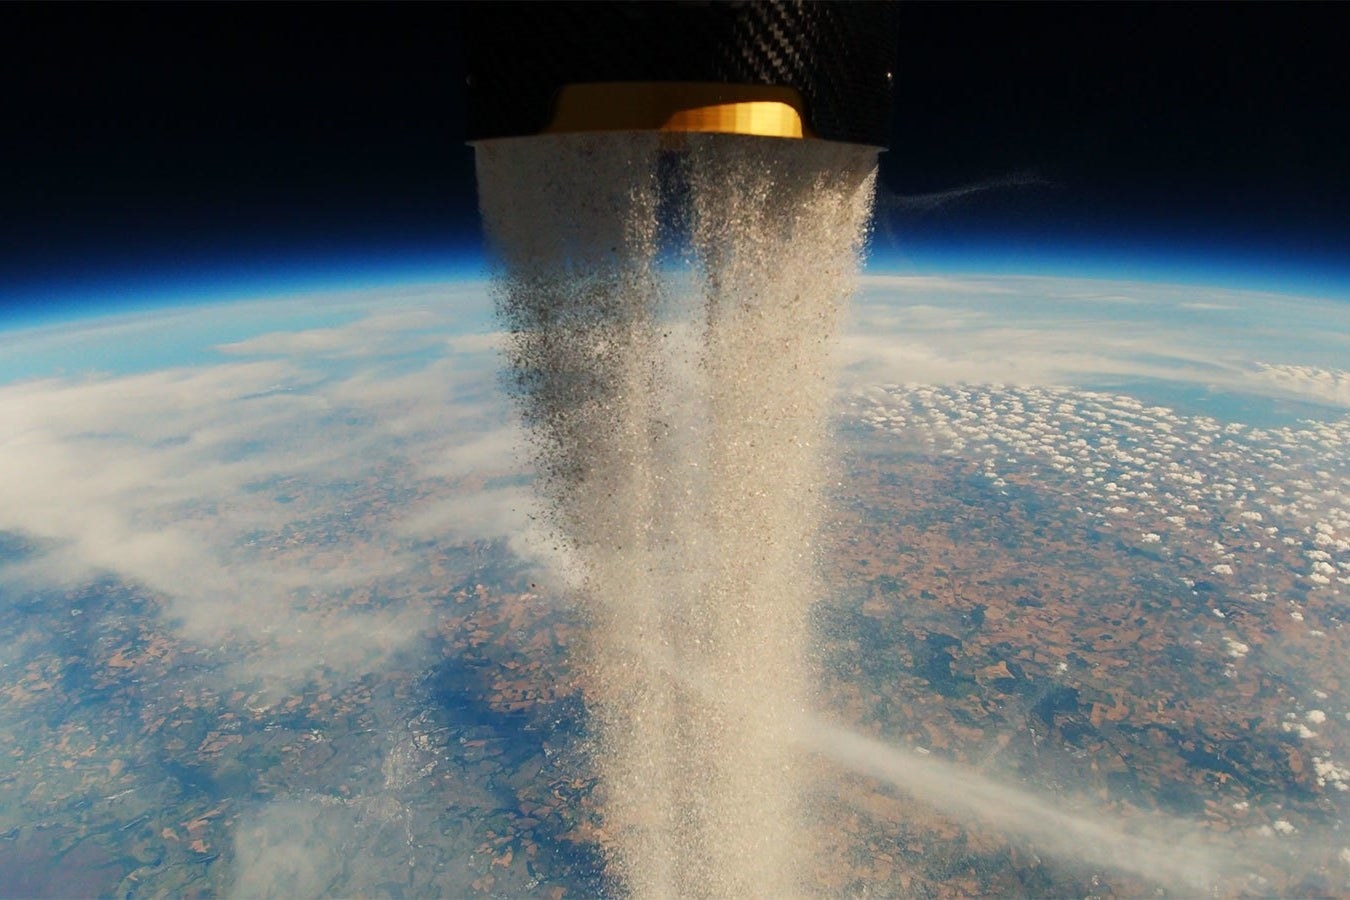 ashes being flung into space with planet earth in the background